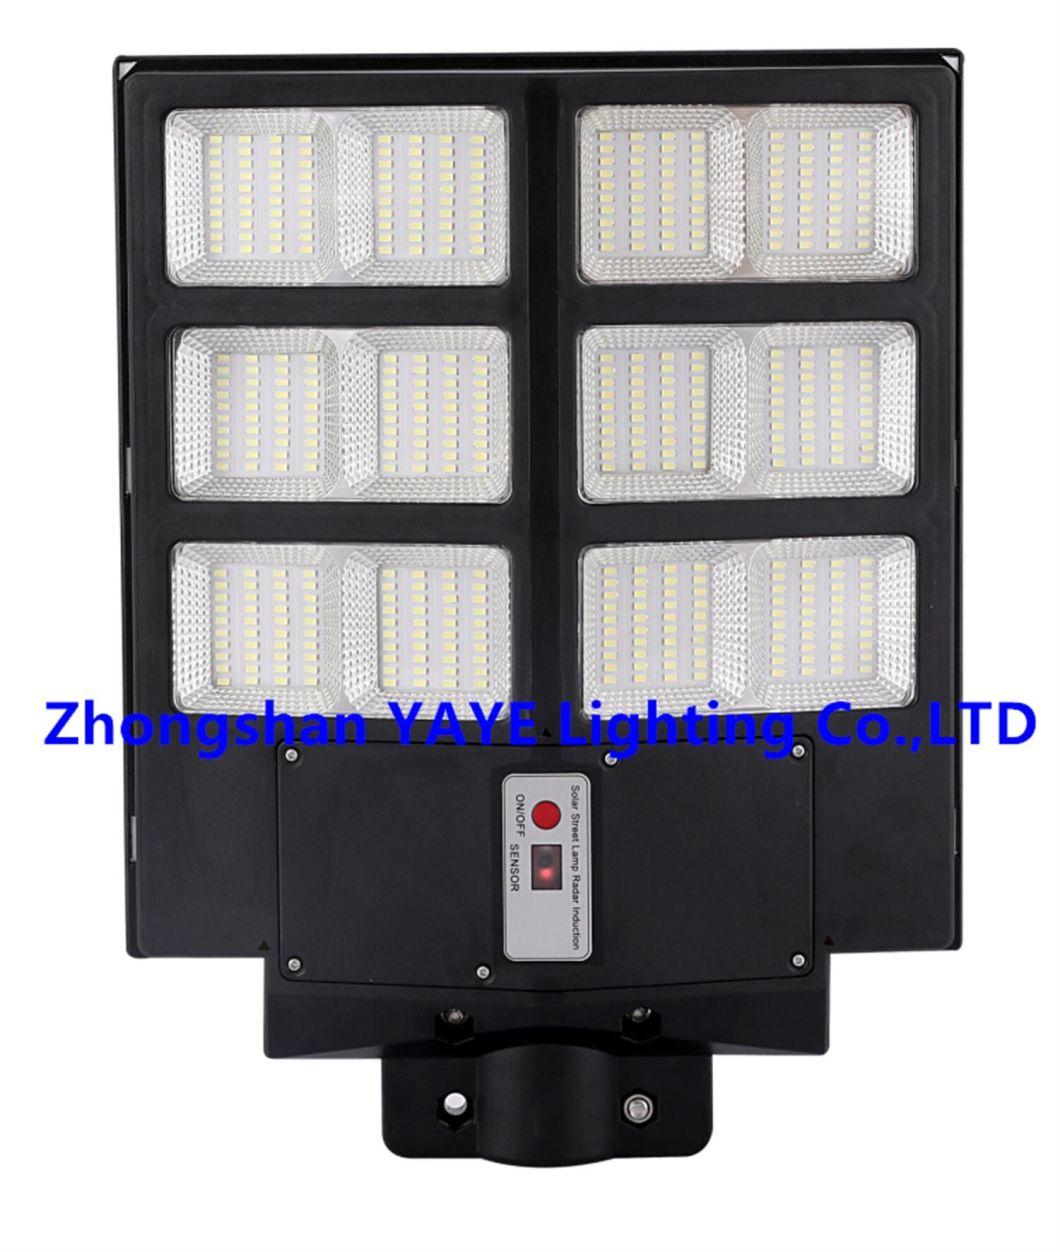 Yaye Hottest Sell 200W Outdoor IP67 All in One LED Solar Street Garden Lighting Light with Remote Controller/ Sensor Radar/1000PCS Stock/ 3 Years Warranty